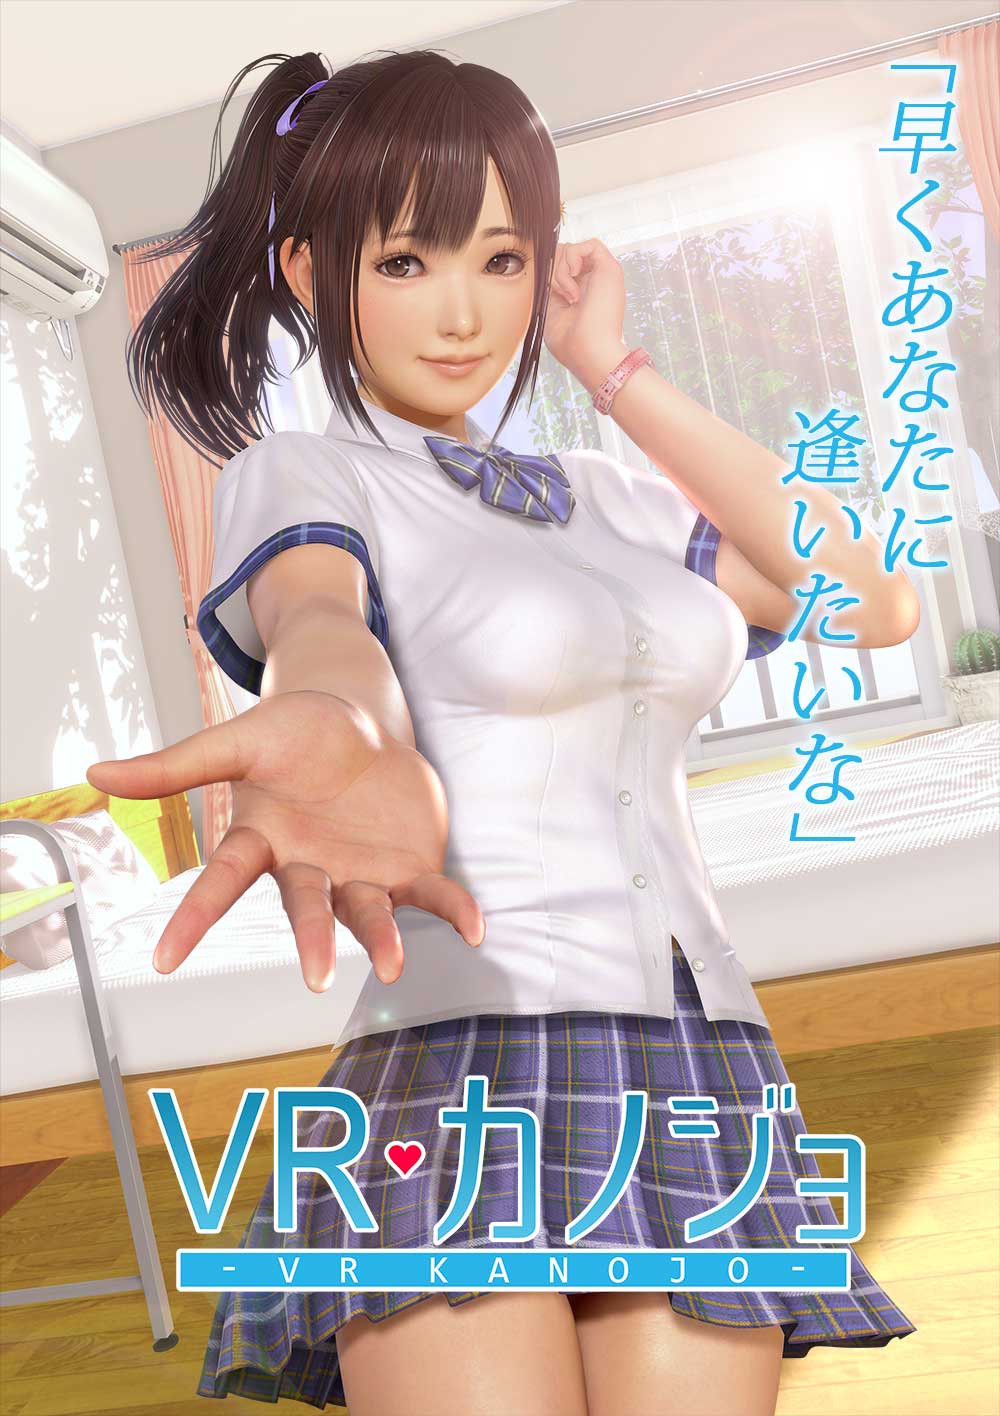 vr kanojo full game download android